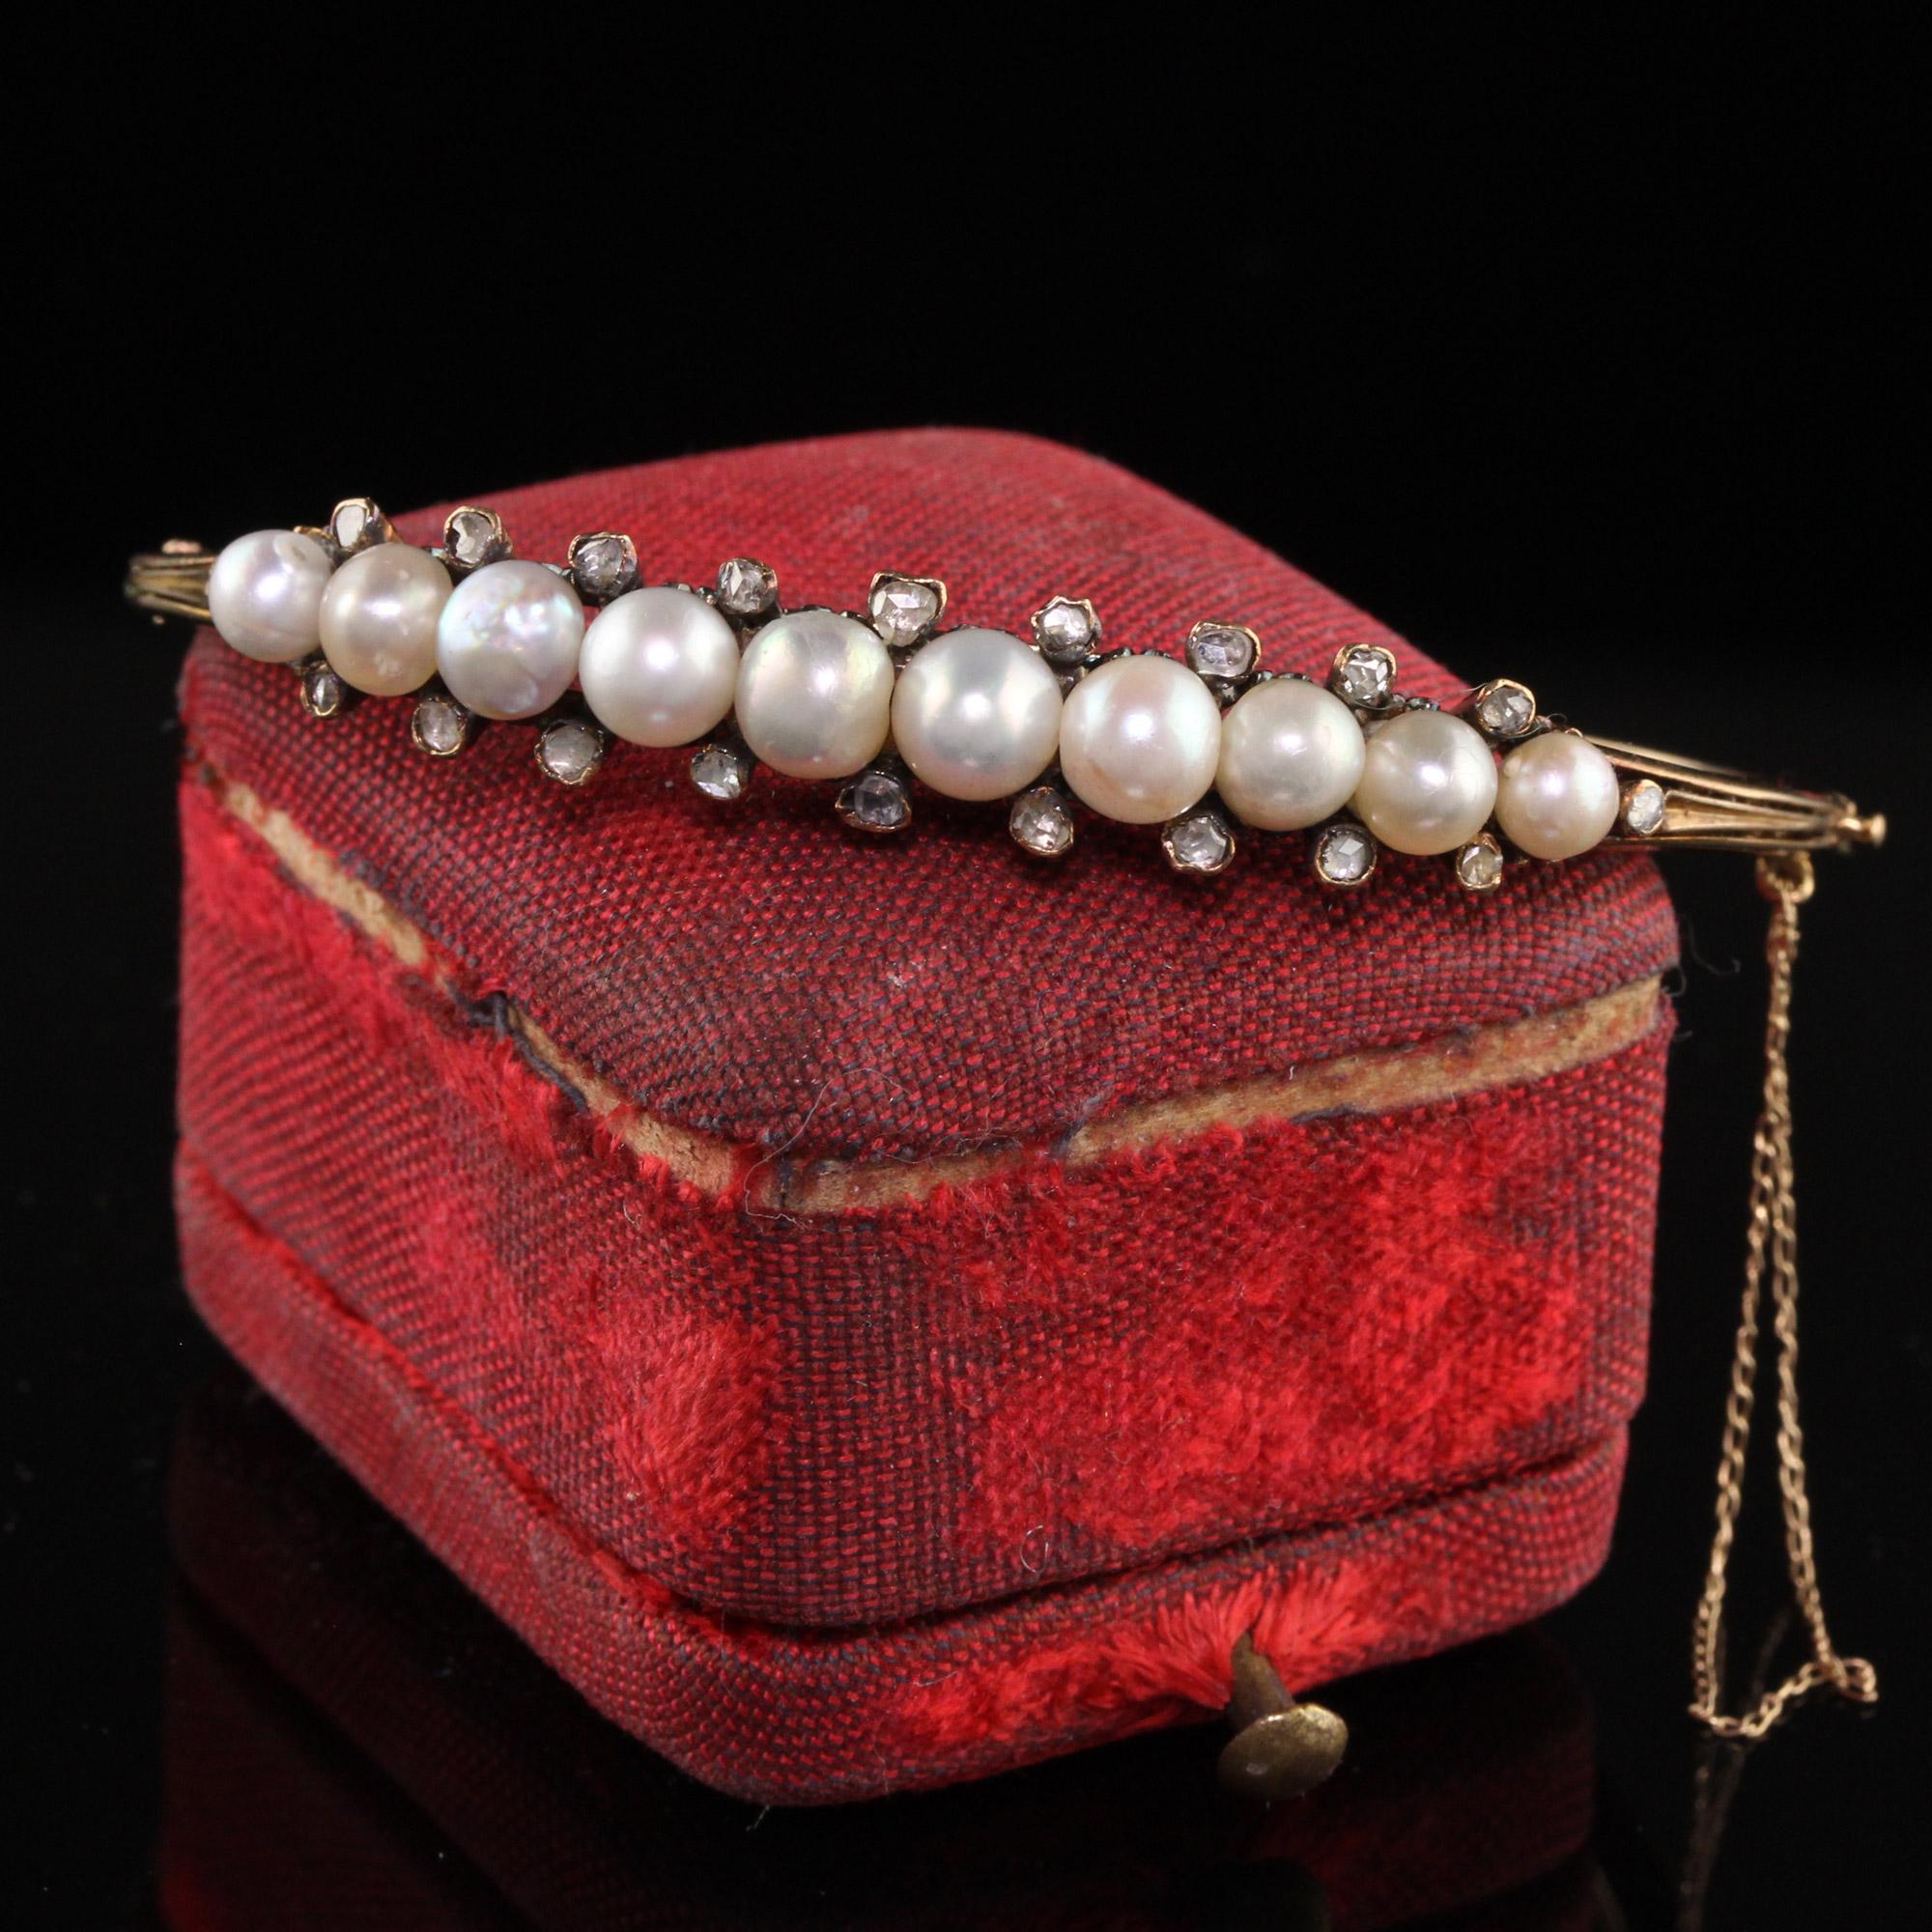 Beautiful Antique Victorian 18K Yellow Gold Natural Pearl Rose Cut Diamond Bangle. This beautiful bangle bracelet is crafted in 18k yellow gold. The top holds ten natural pearls and has rose cuts above and below each one. One of the pearls looks to